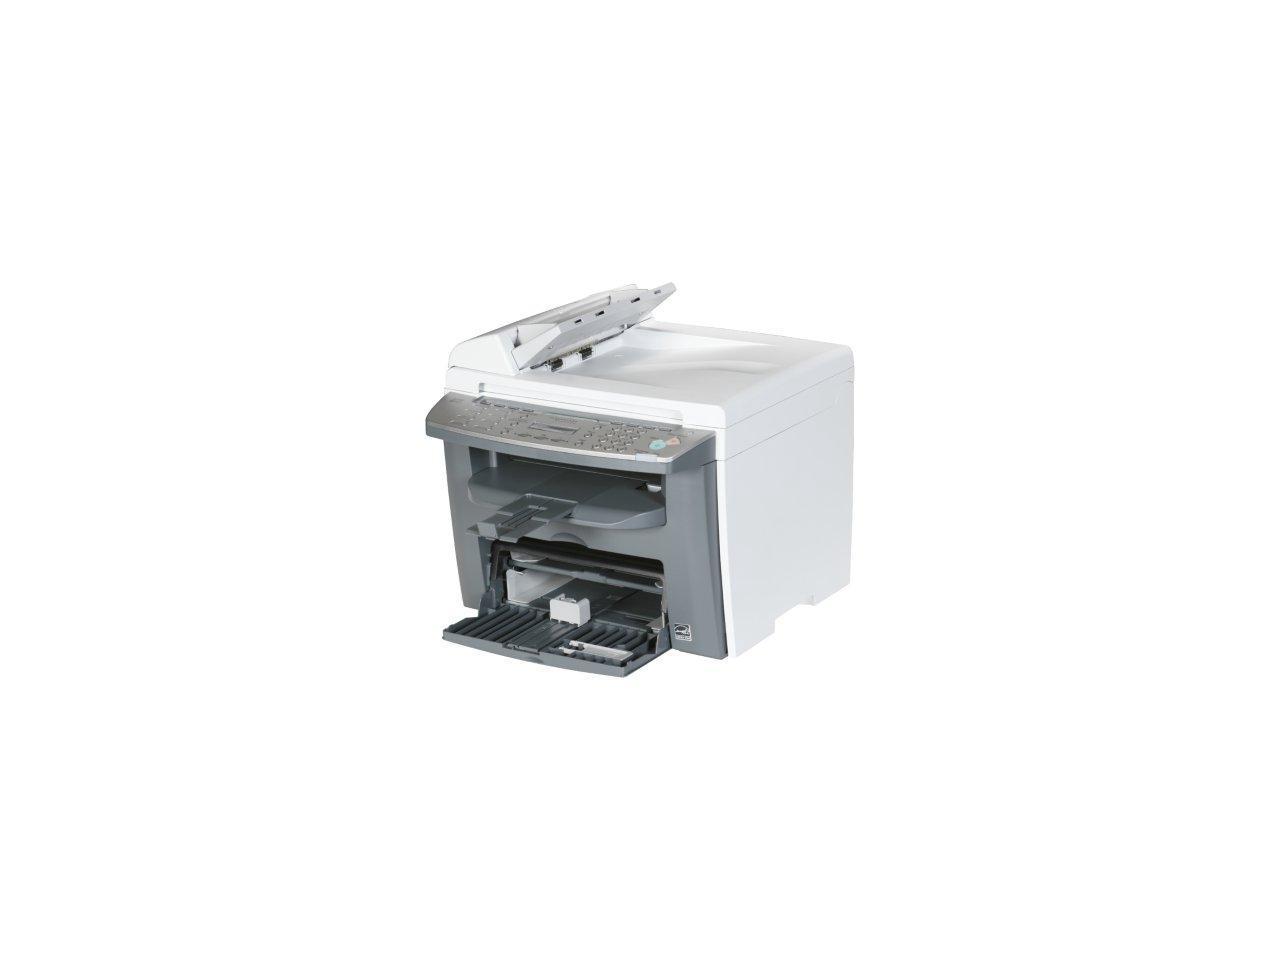 canon super g3 printer paper jam in manual feed tray